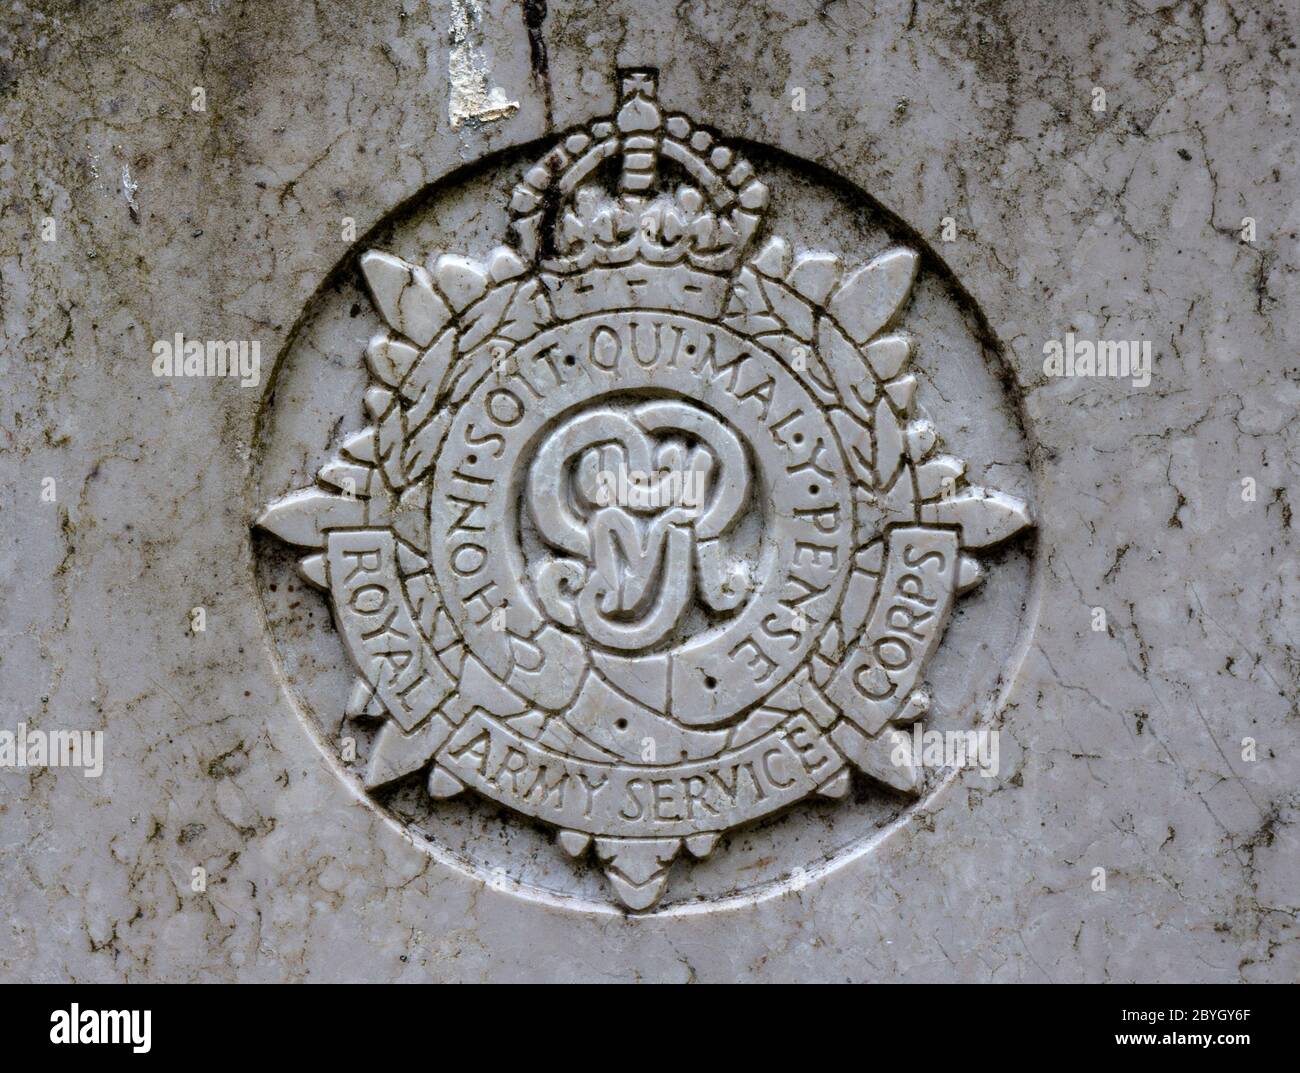 Royal Army Service Corps crest on a war grave, UK Stock Photo